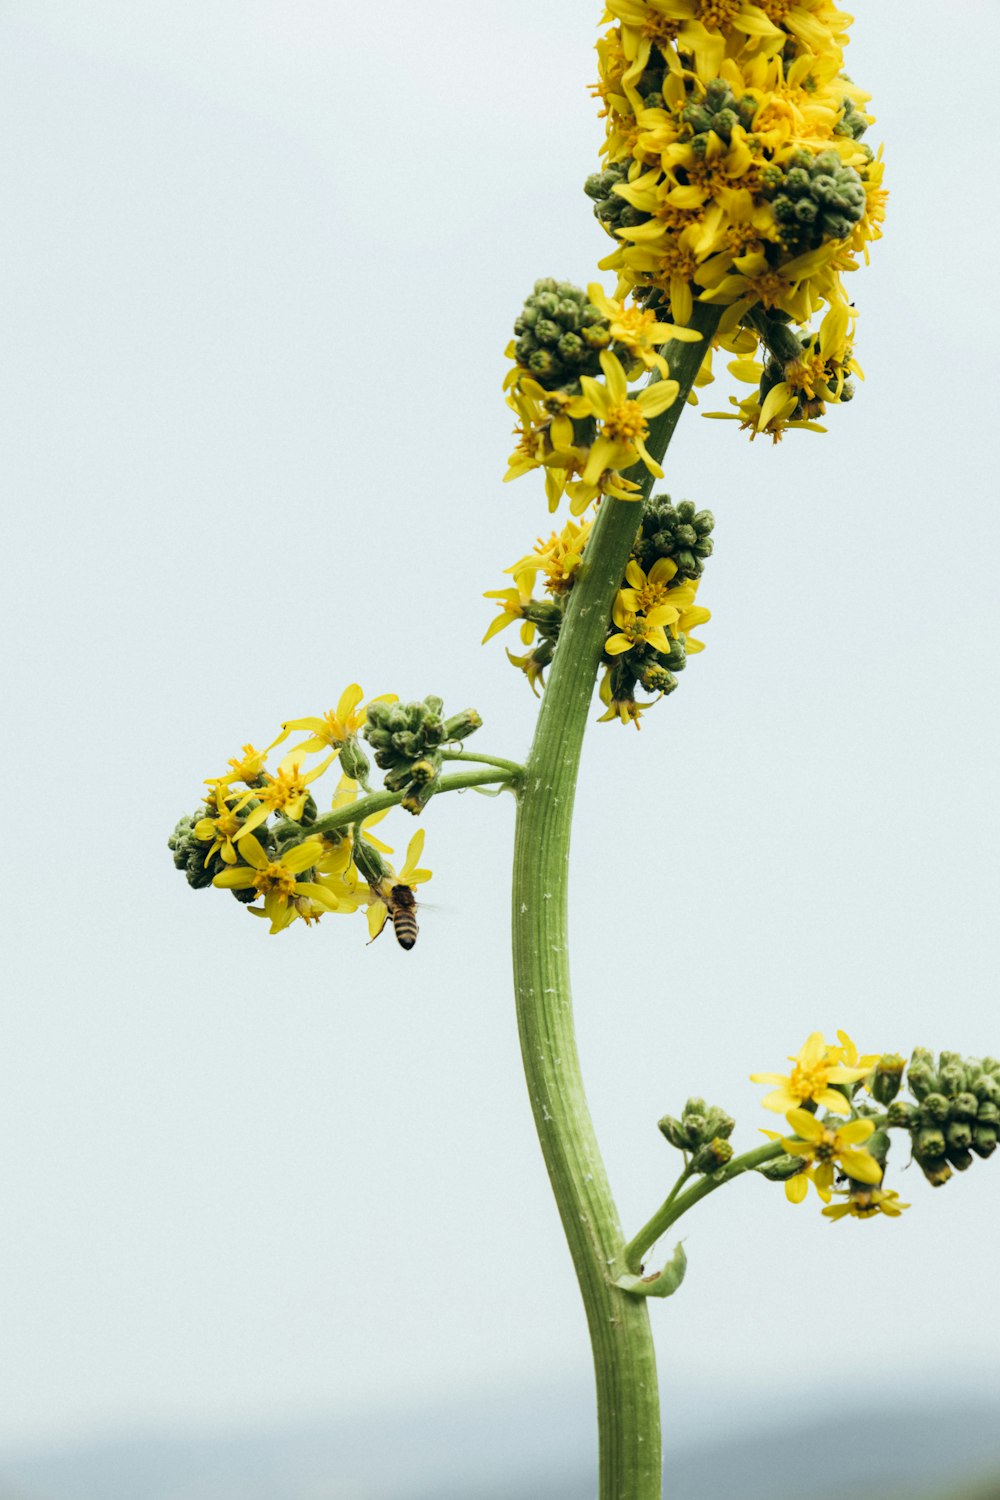 a plant with yellow flowers in the middle of a field